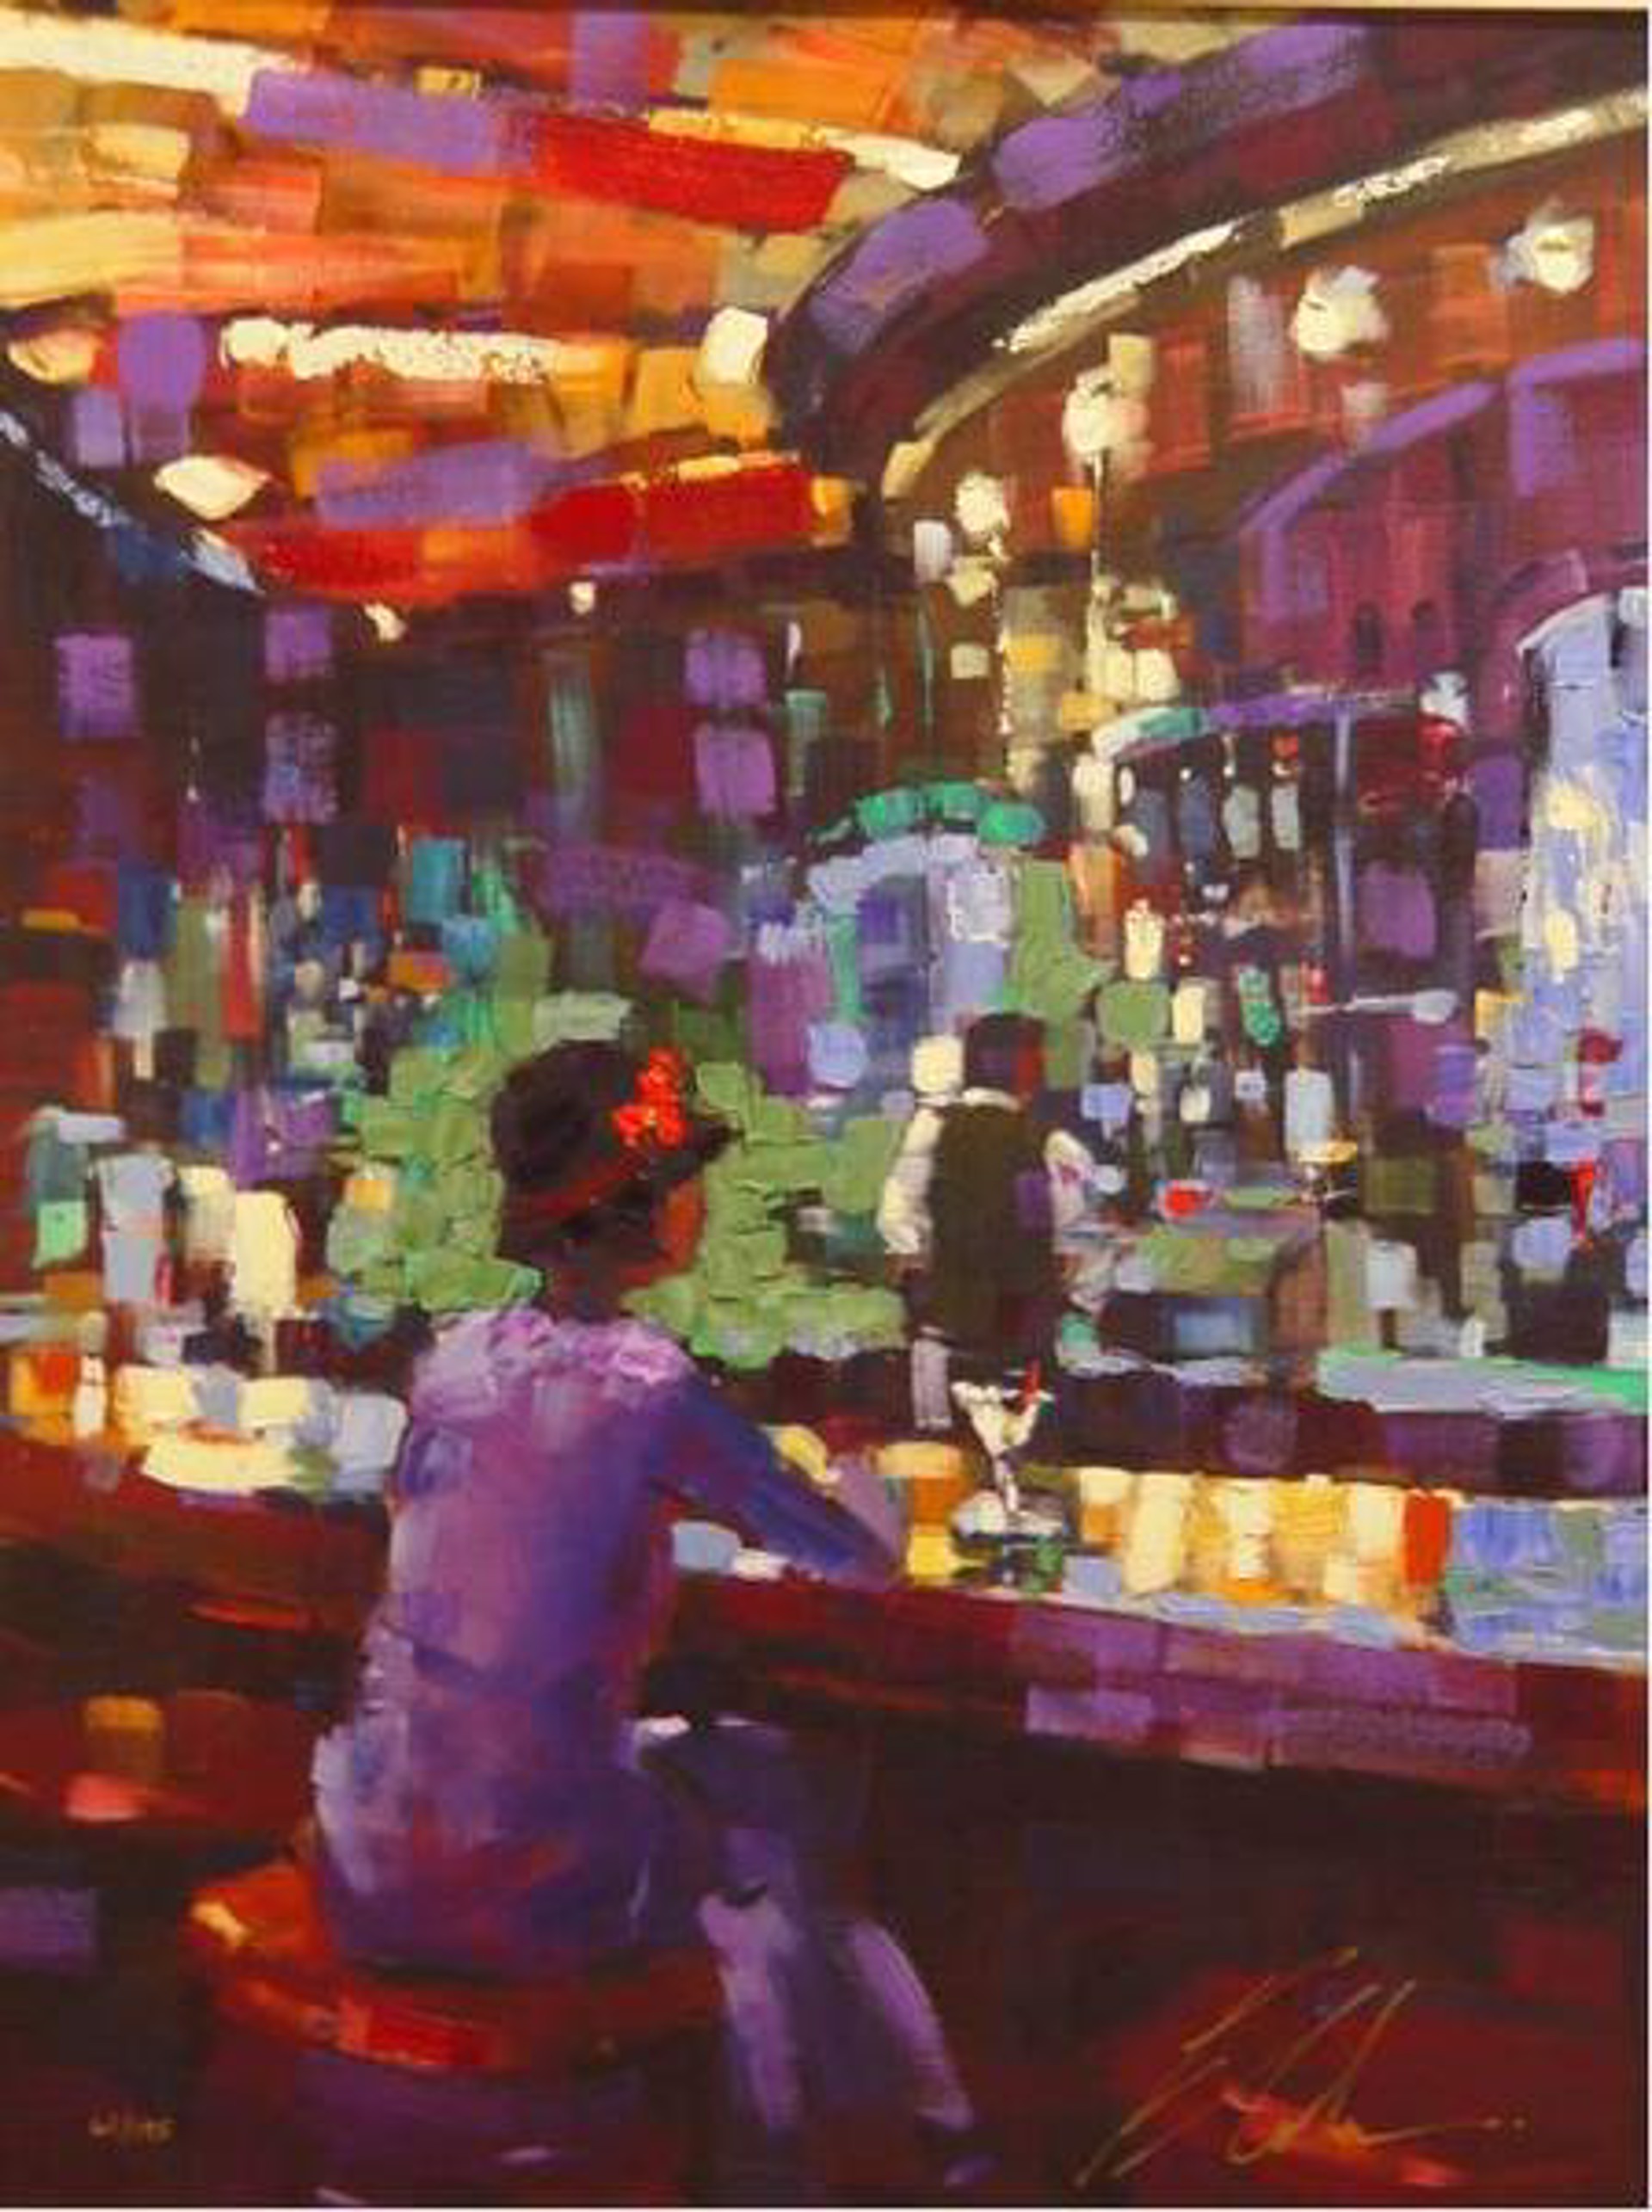 Mel at the Bar by Michael Flohr